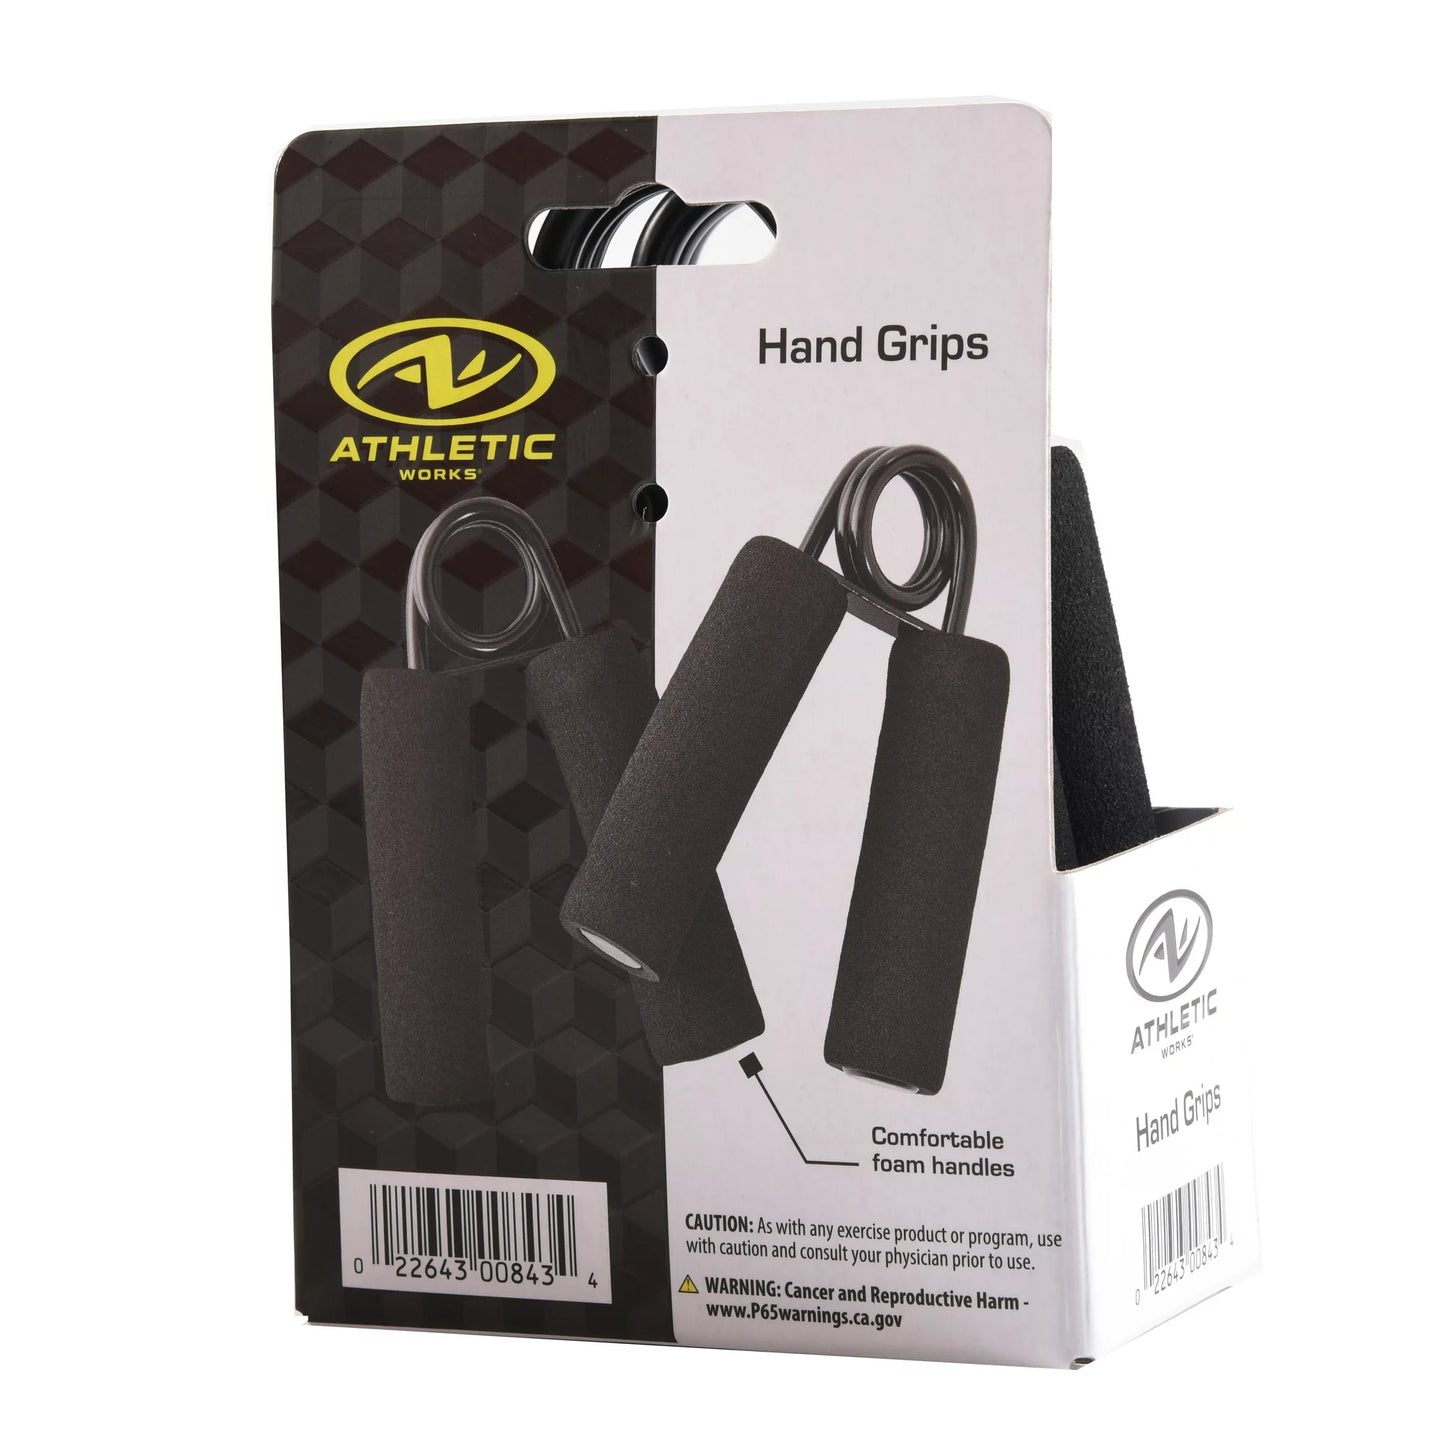 Athletic Works Hand Grips